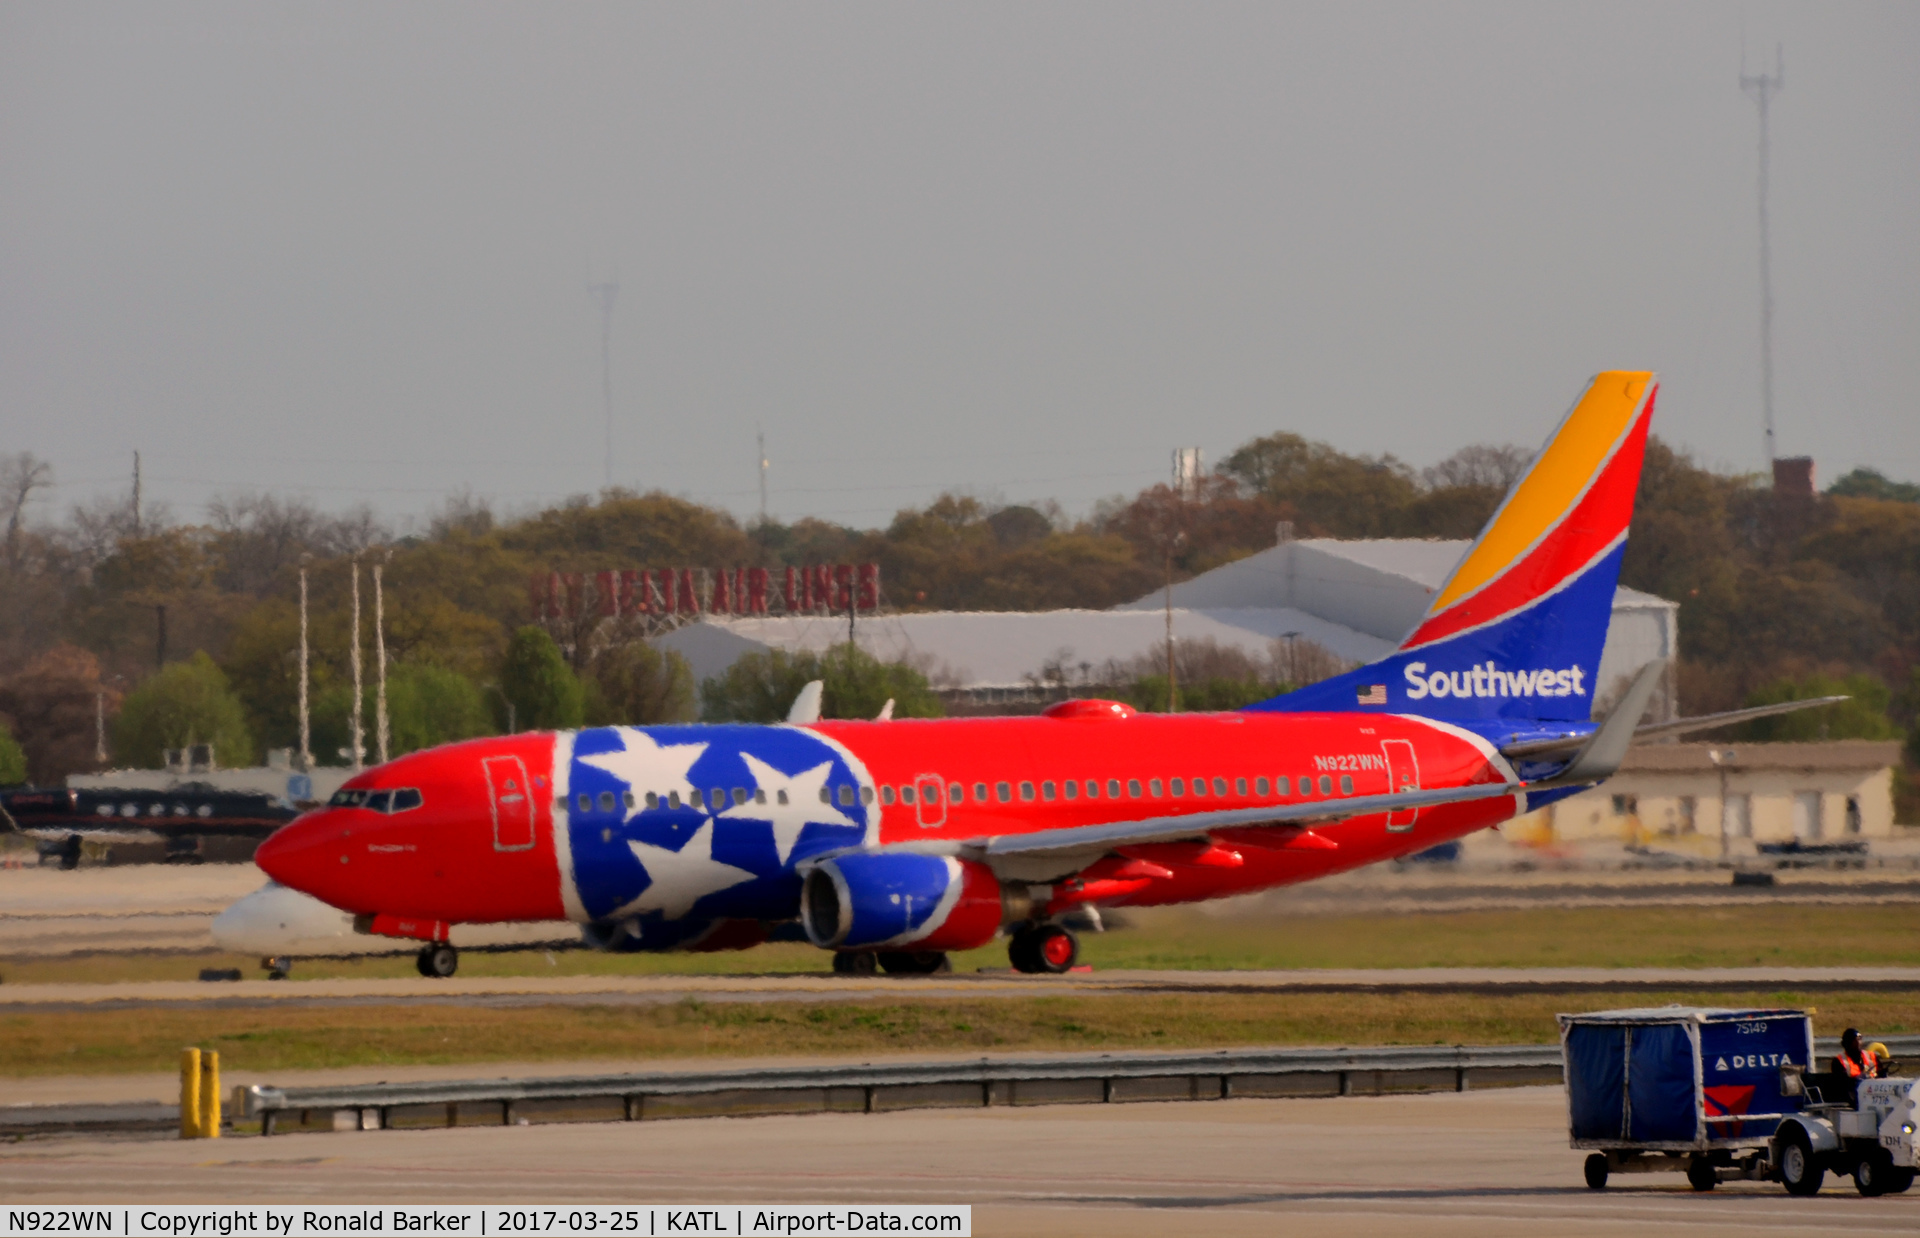 N922WN, 2008 Boeing 737-7H4 C/N 32461, Tennessee One taxi for takeoff Atlanta